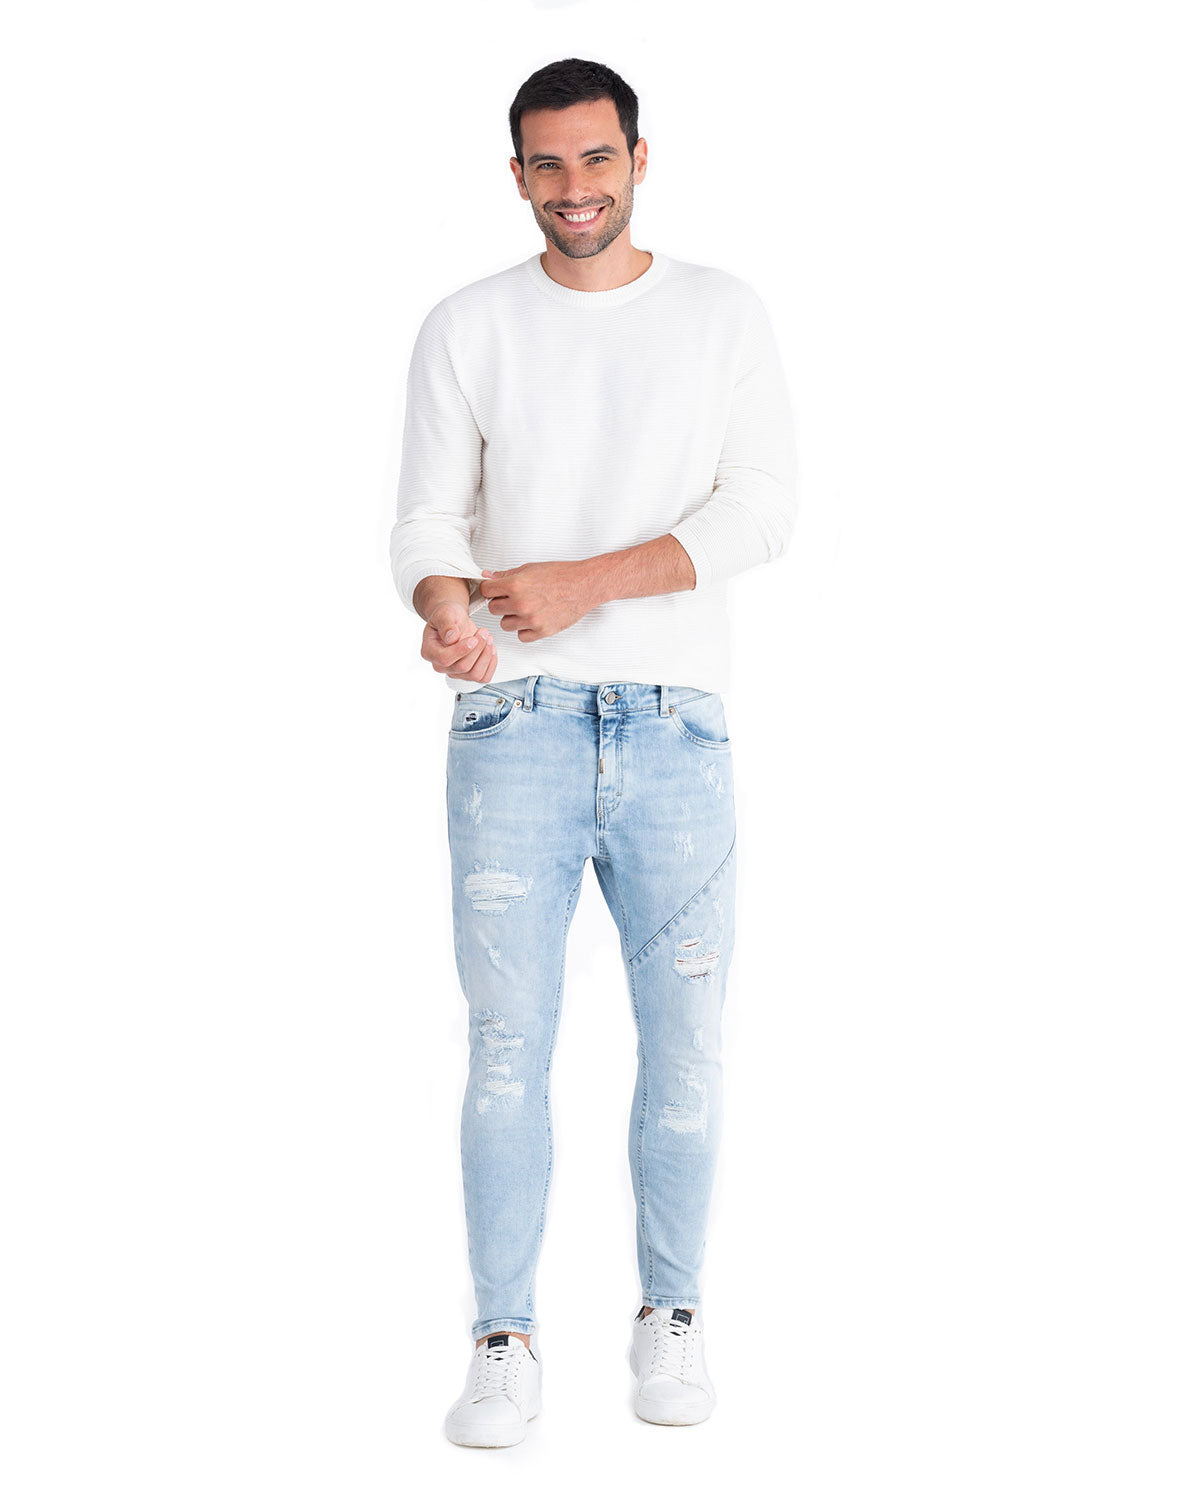 Jeans Uomo Fashion - Used look